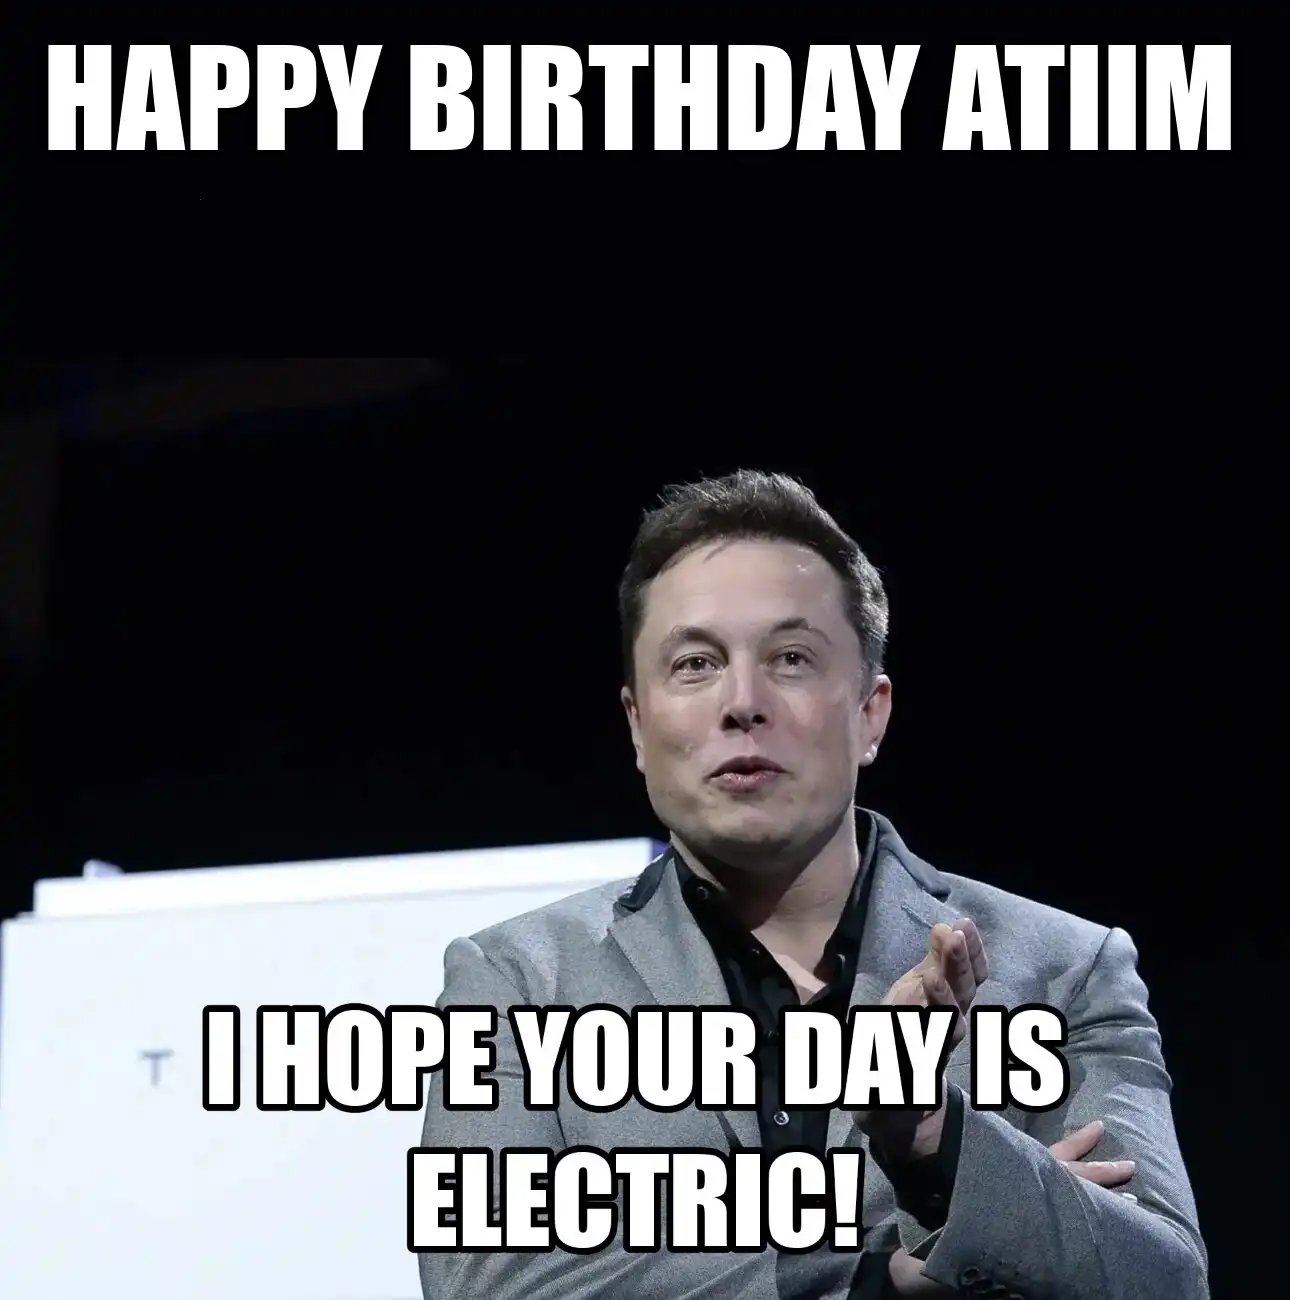 Happy Birthday Atiim I Hope Your Day Is Electric Meme